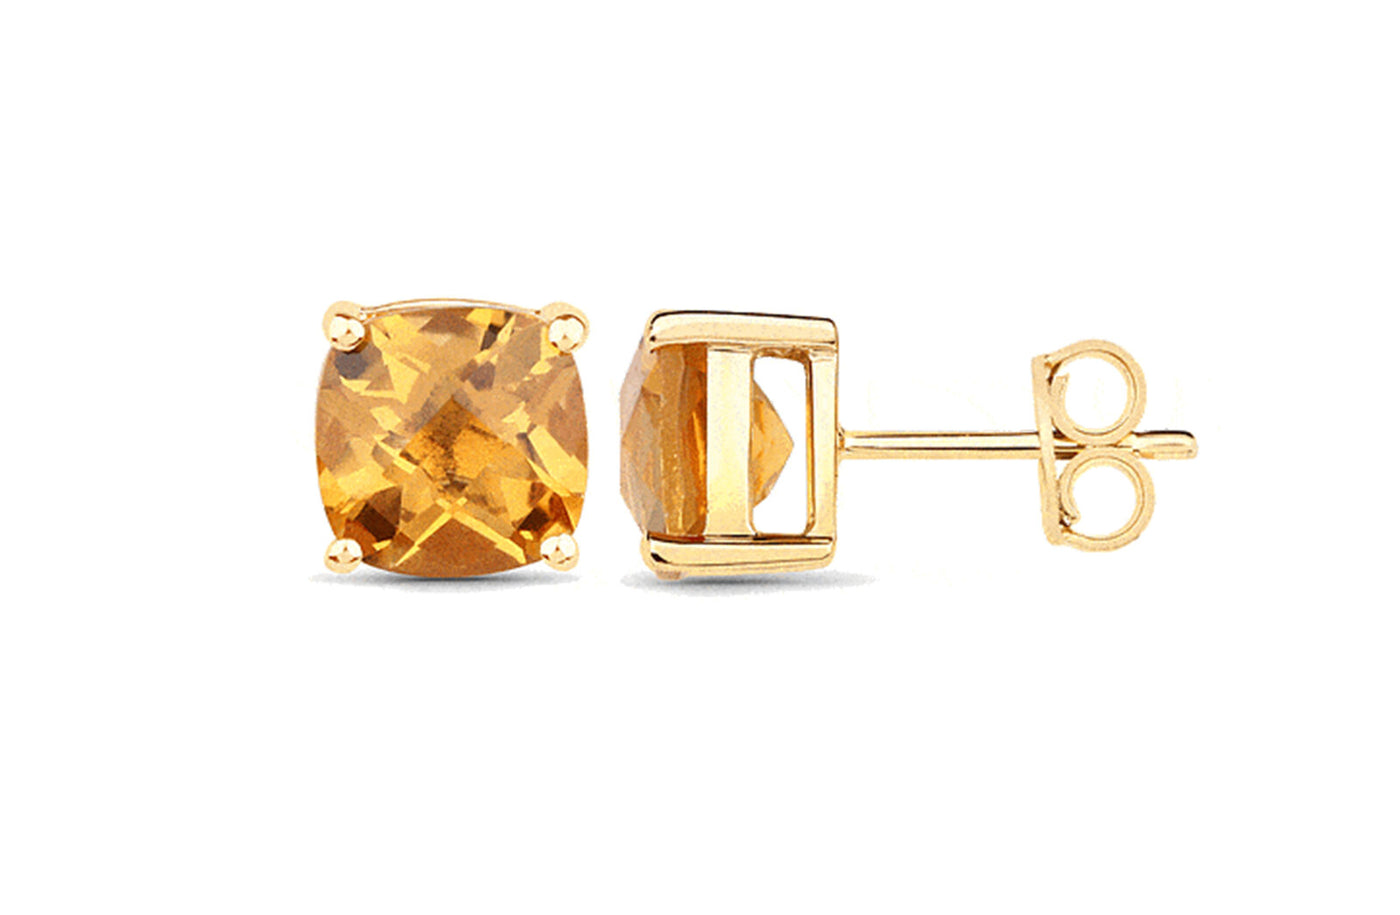 Chequerboard Madeira Citrine Stud Earrings in Yellow Gold | 3.92ctw